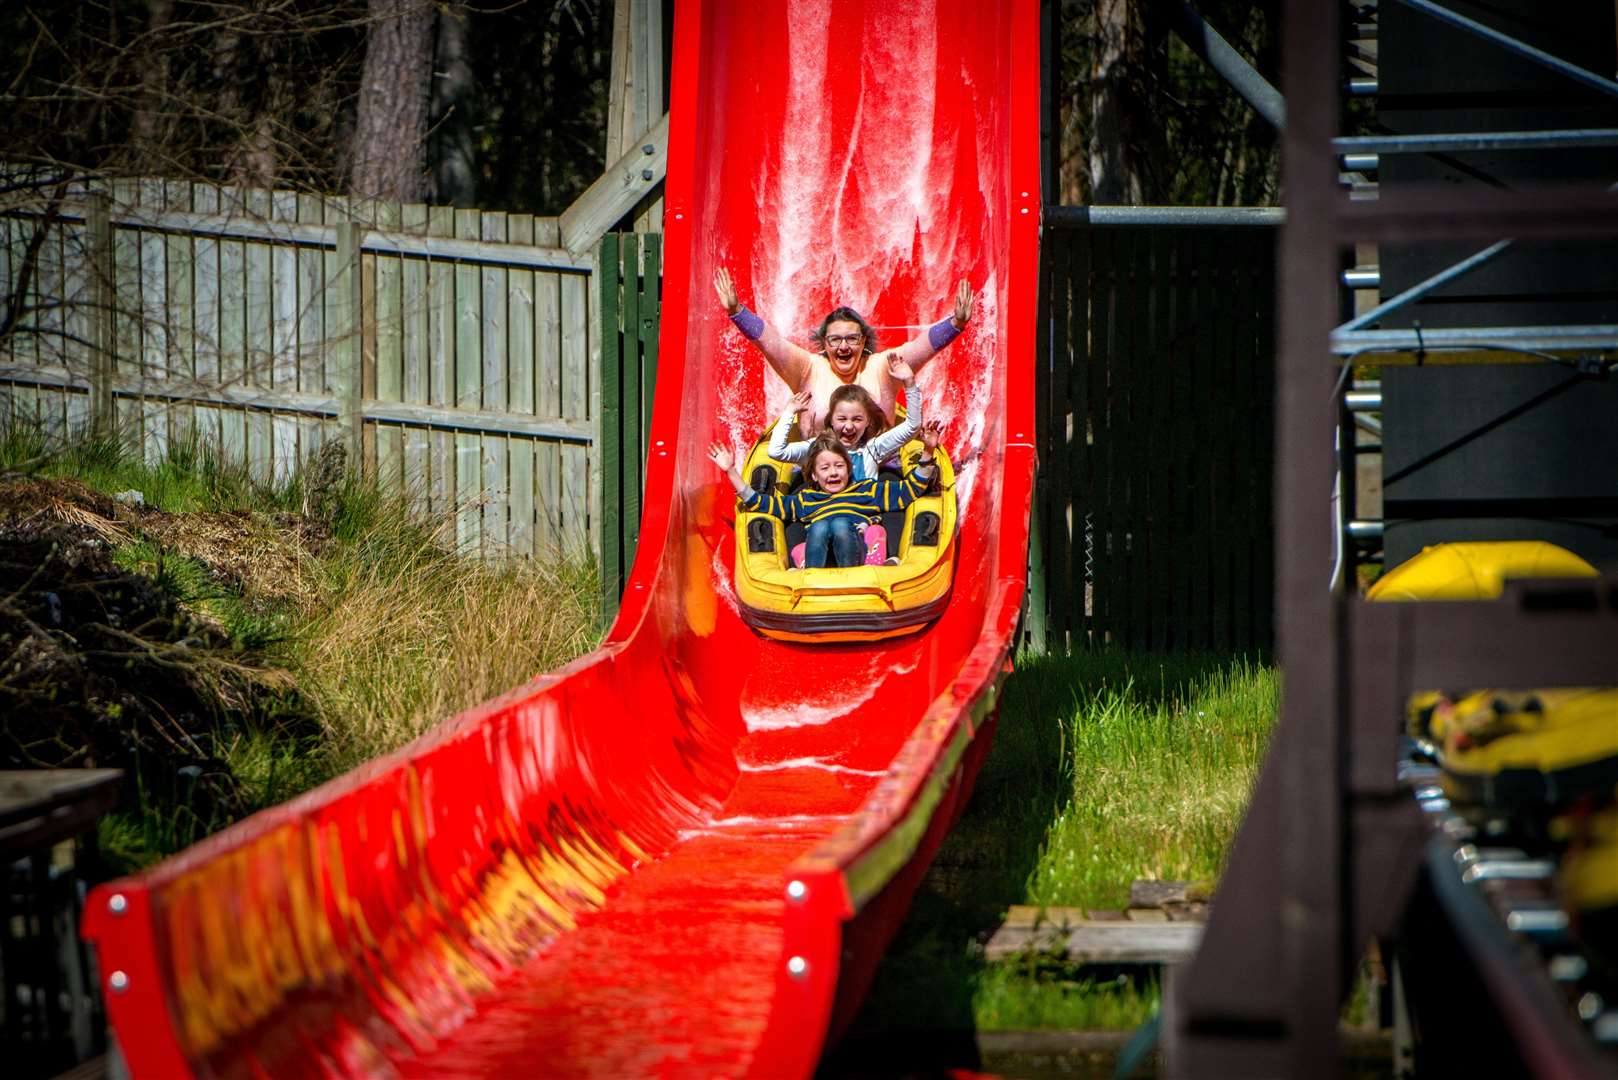 The Wild Water Coaster is one of the most popular attractions at Landmark Forest Adventure Park.